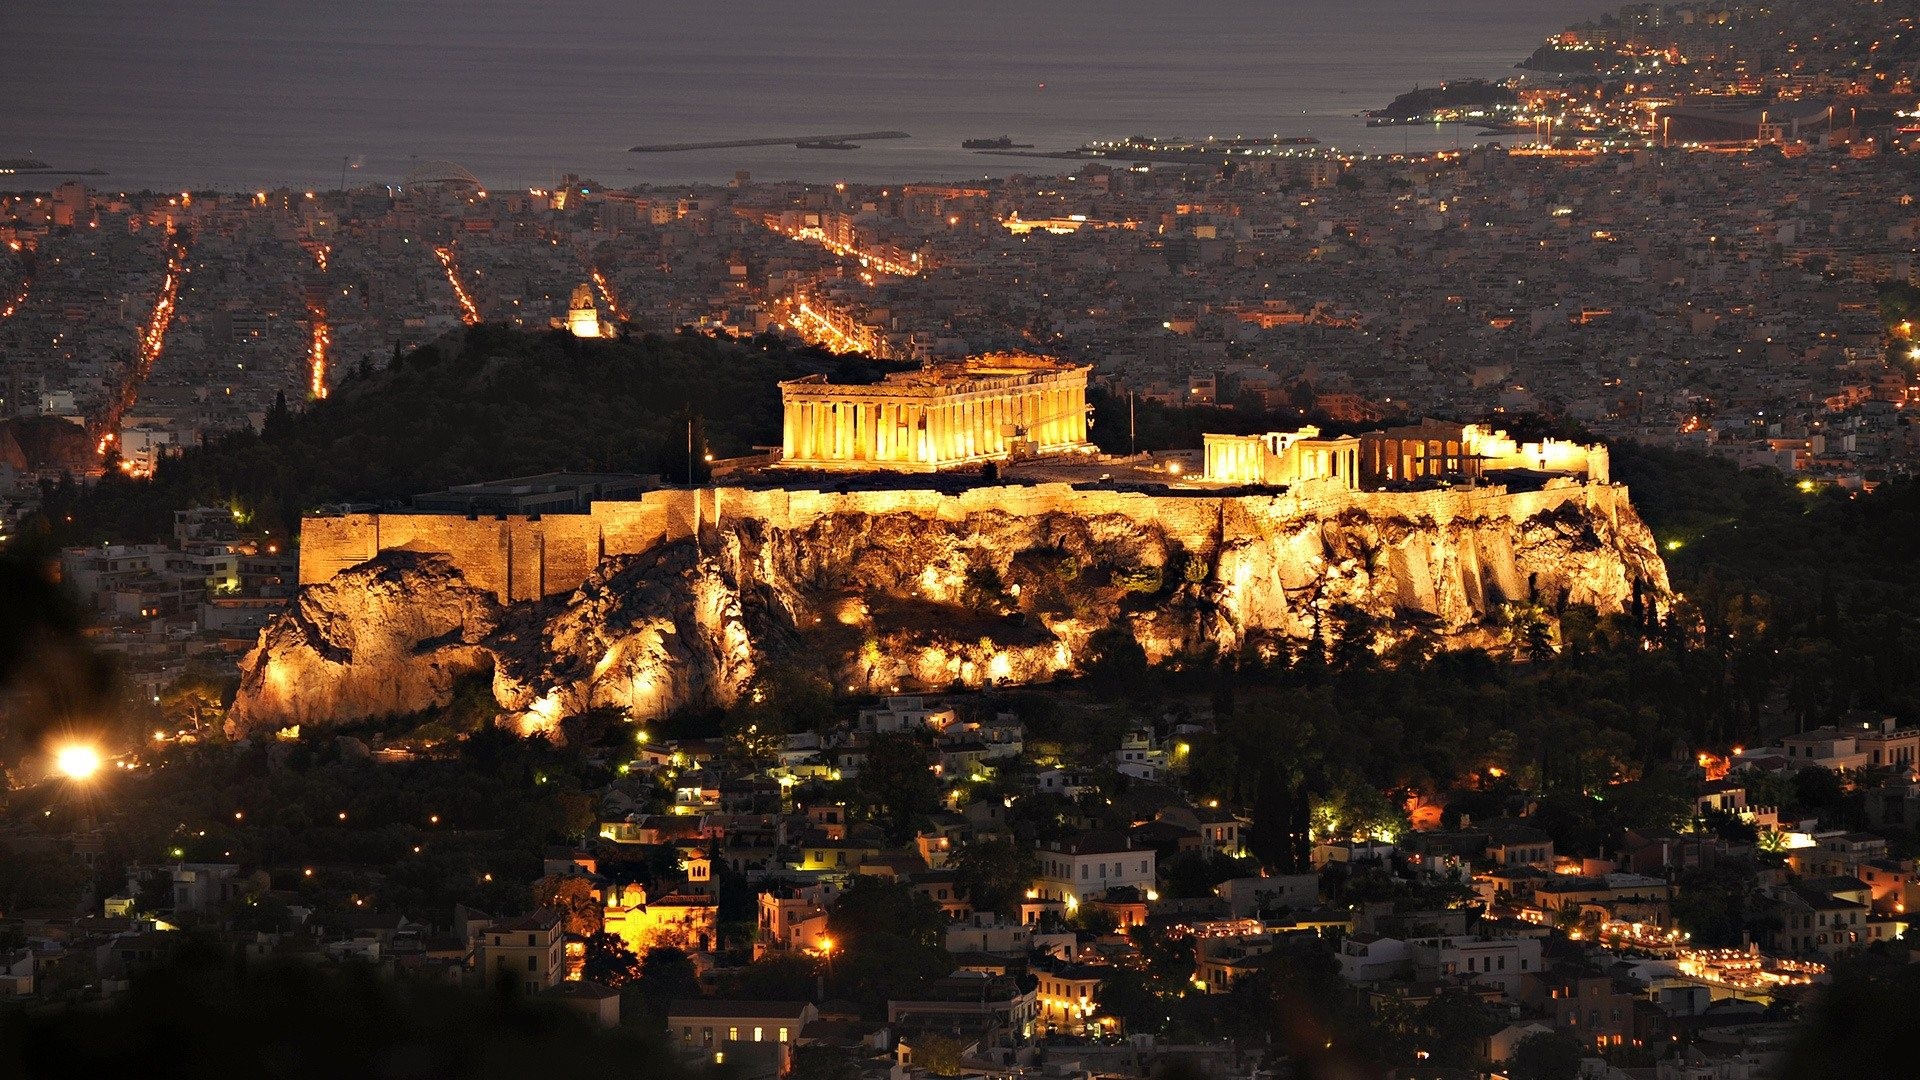 General 1920x1080 architecture old building lights evening city Athens Greece cityscape rocks acropolis hills sea house history column trees street aerial view